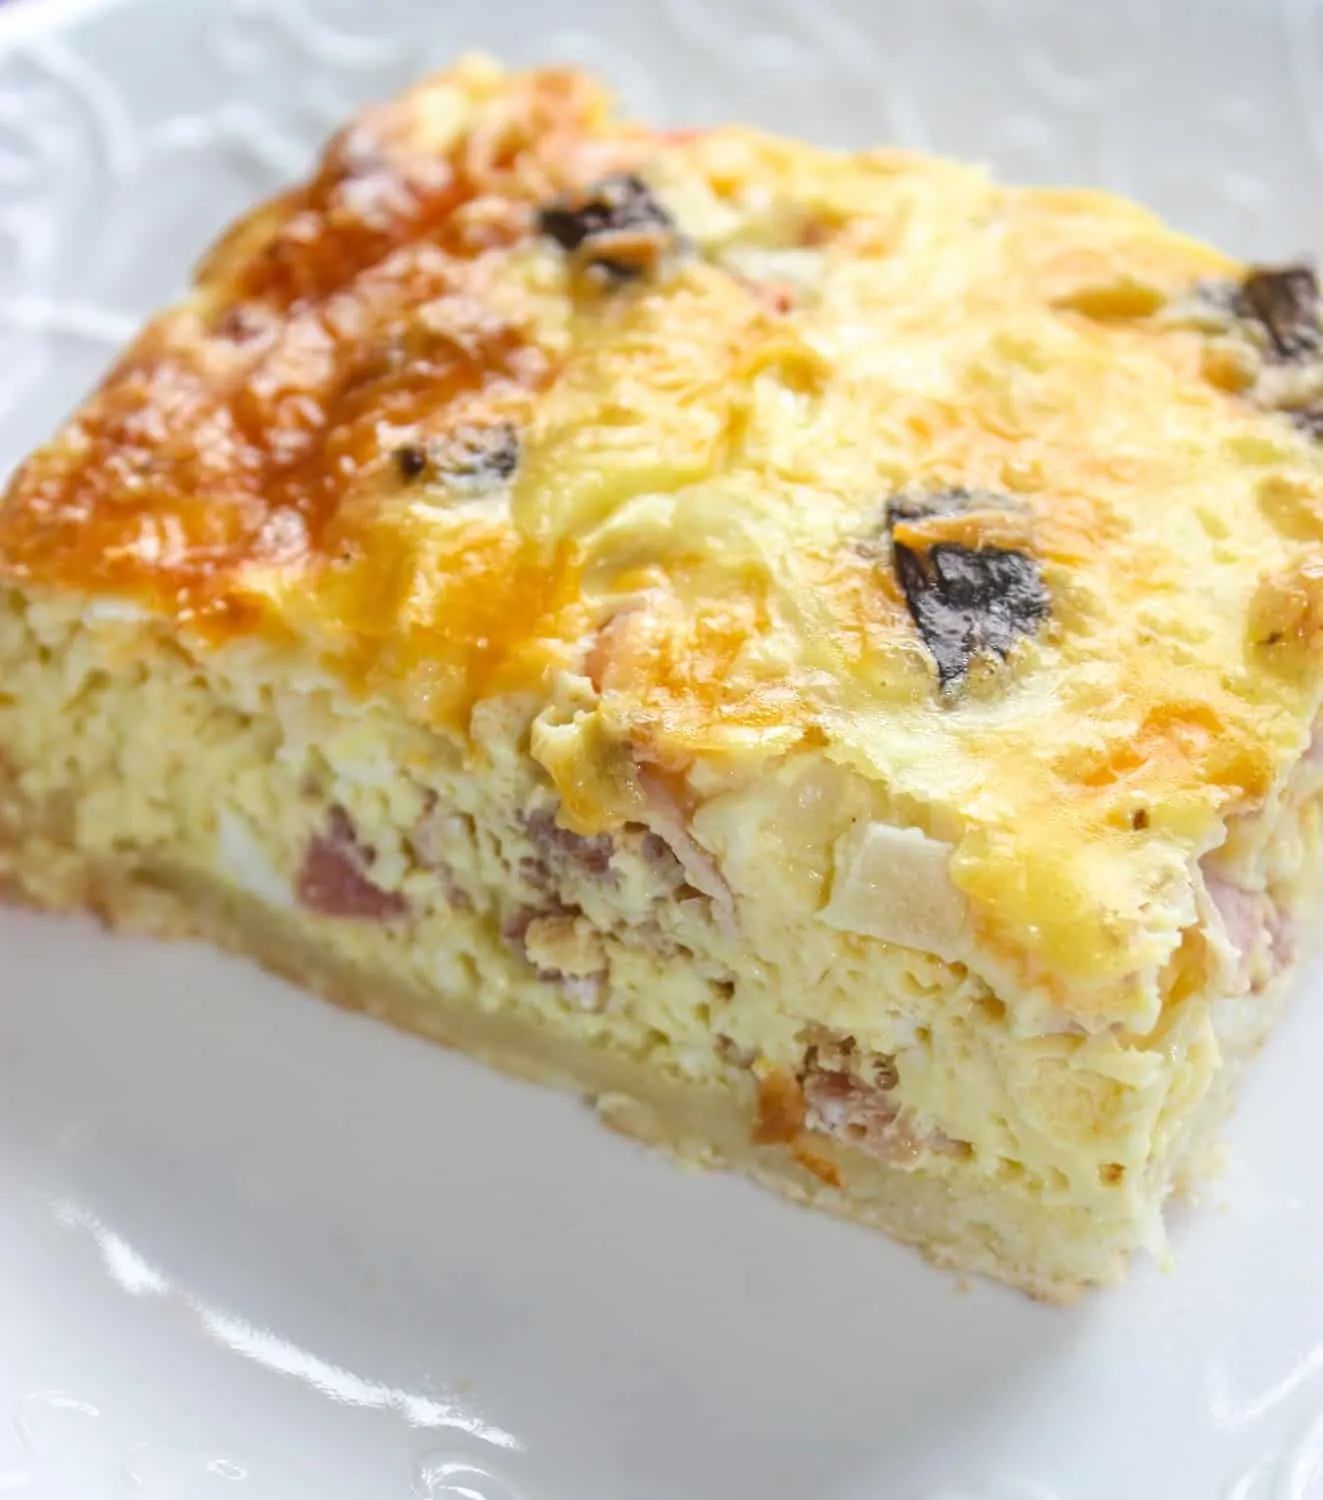 This Breakfast Casserole is a great alternative to the standard bacon and egg brunch or breakfast.  The egg layer is loaded with vegetables and meat before it is poured over a gluten free crust.